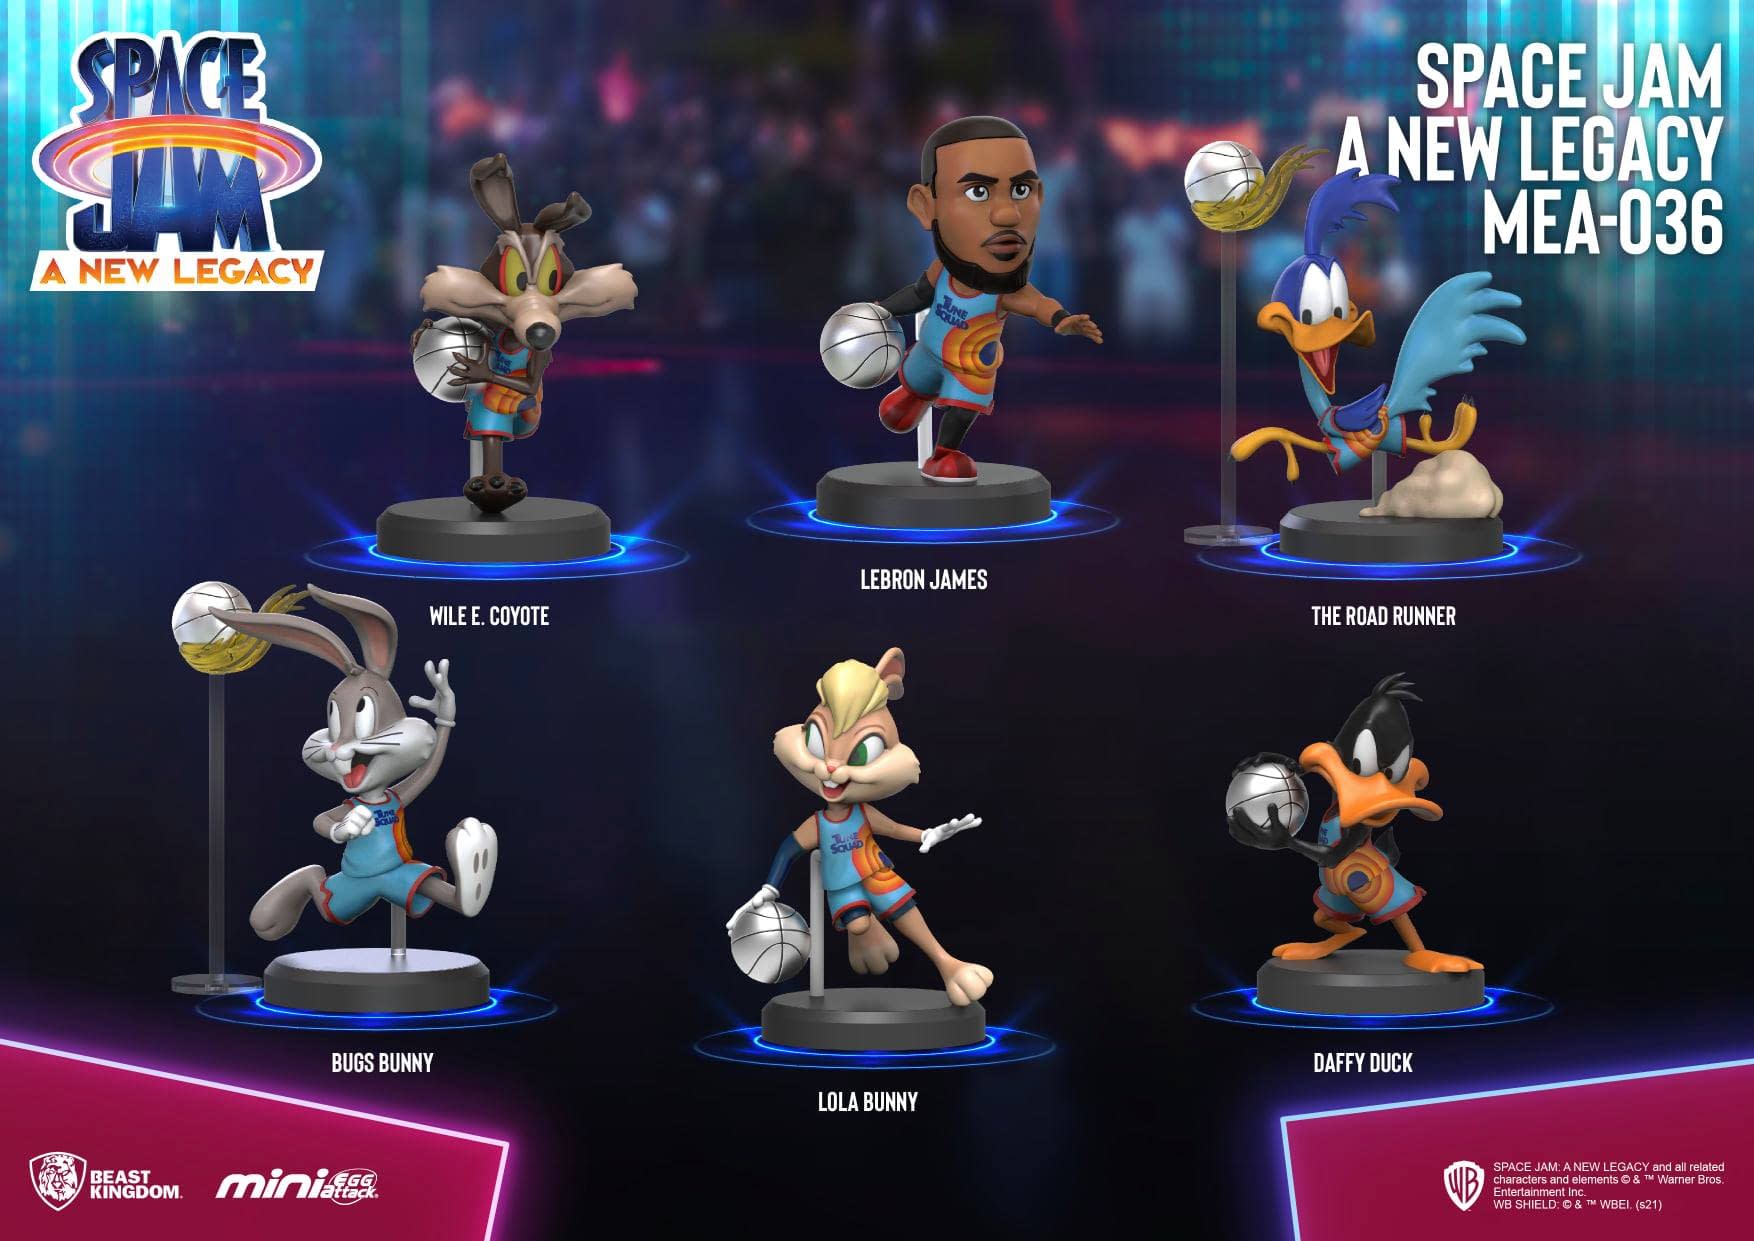 Goon Squad vs. Monstars: Meet the new cast of NBA-inspired villains in 'Space  Jam: A New Legacy